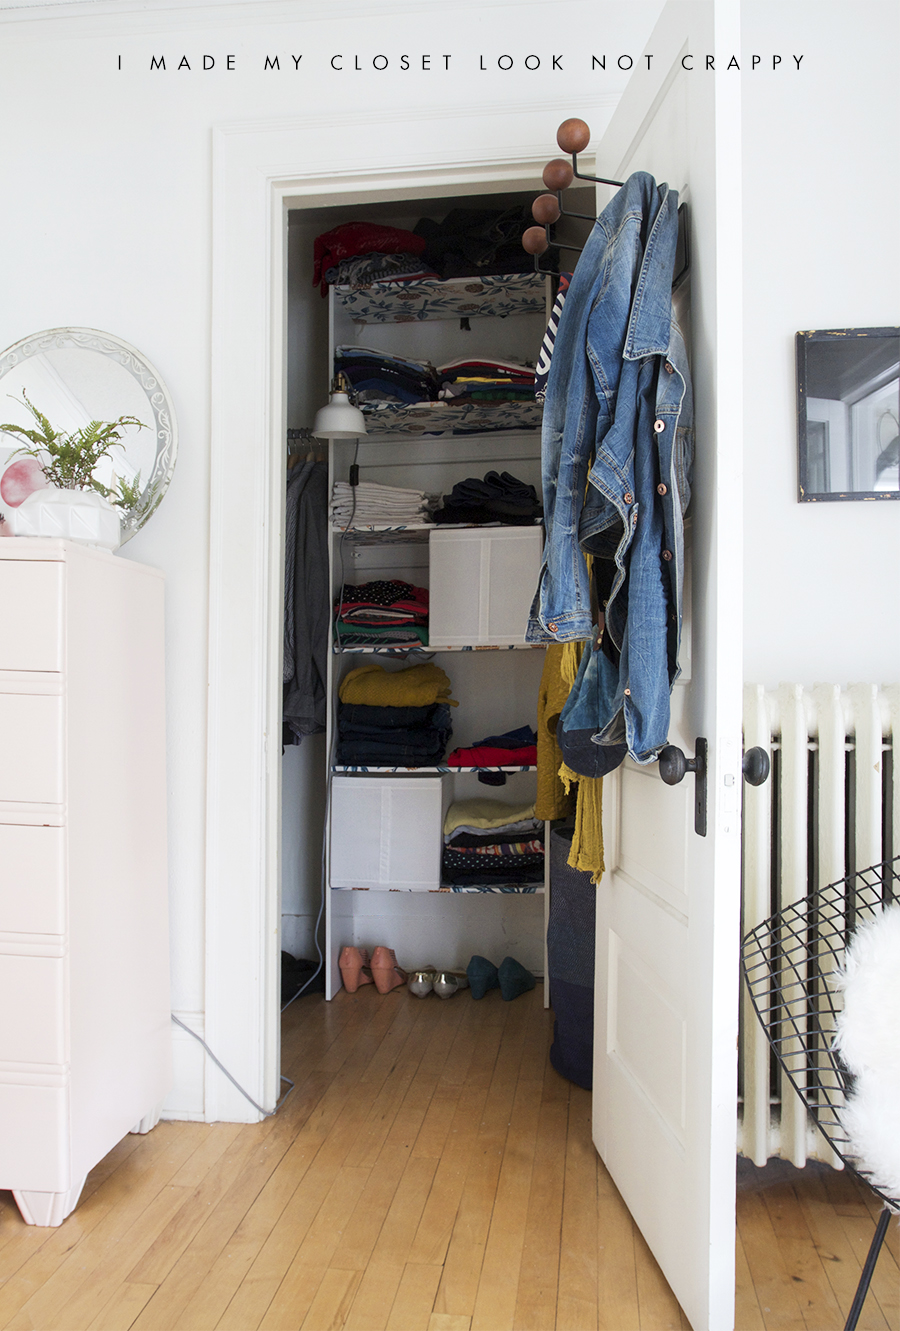 Easy Closet Clean Up, Wallpaper shelves and paint for a fresh look